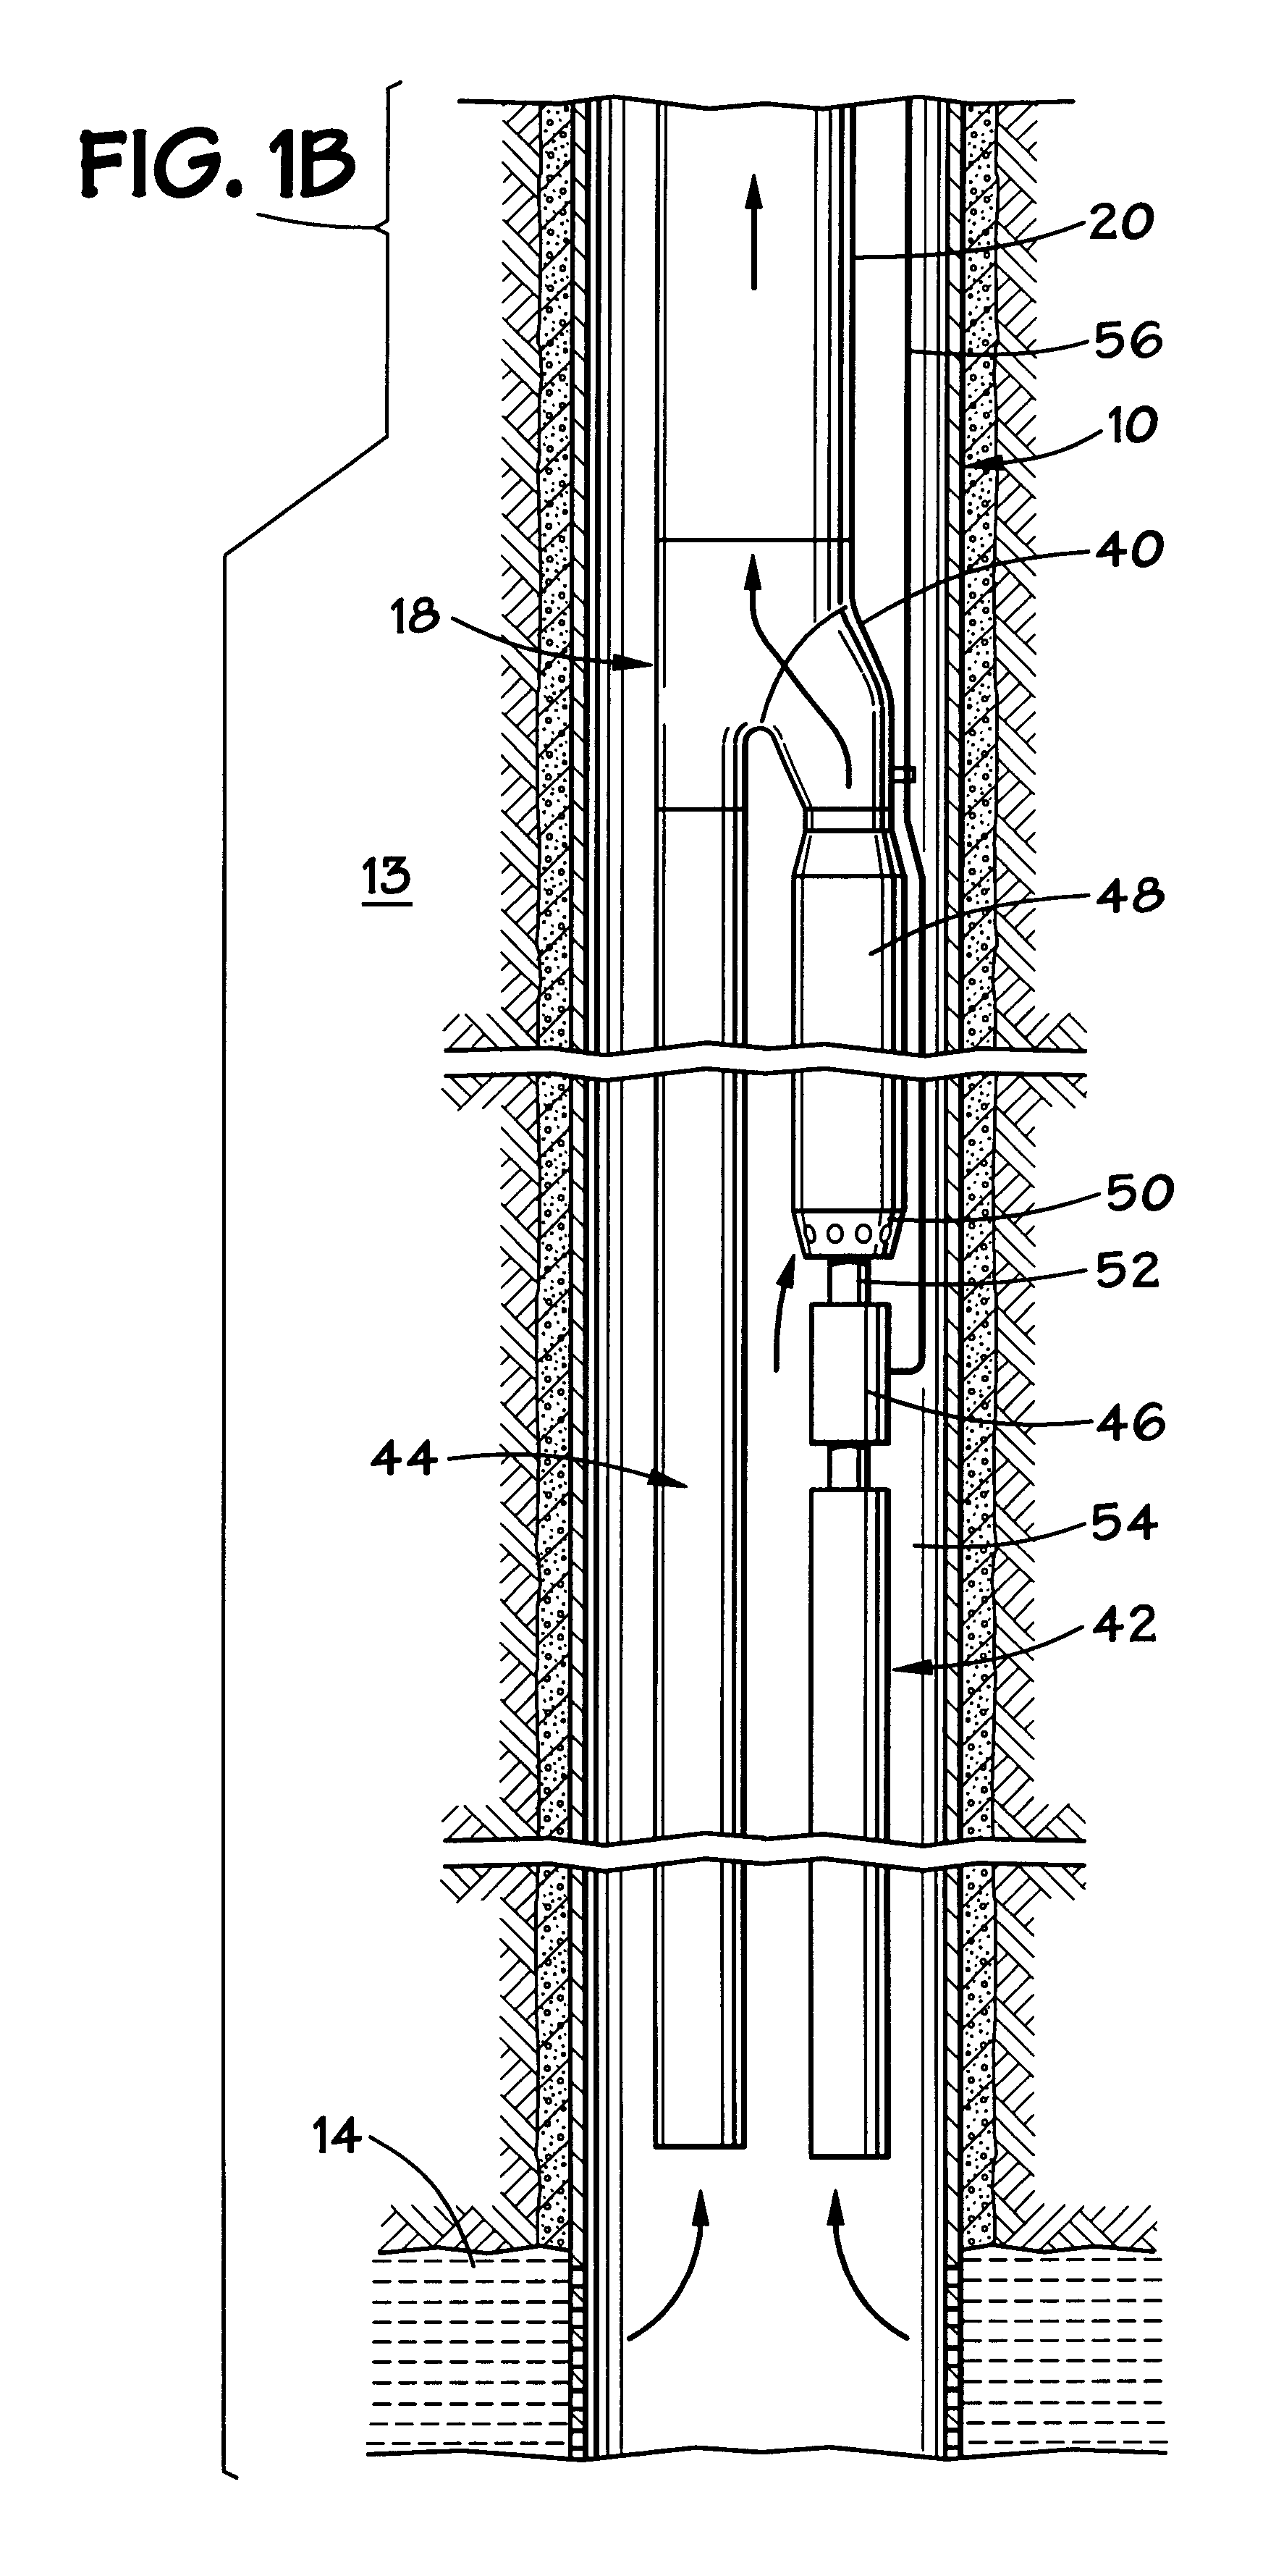 Progressive production methods and system